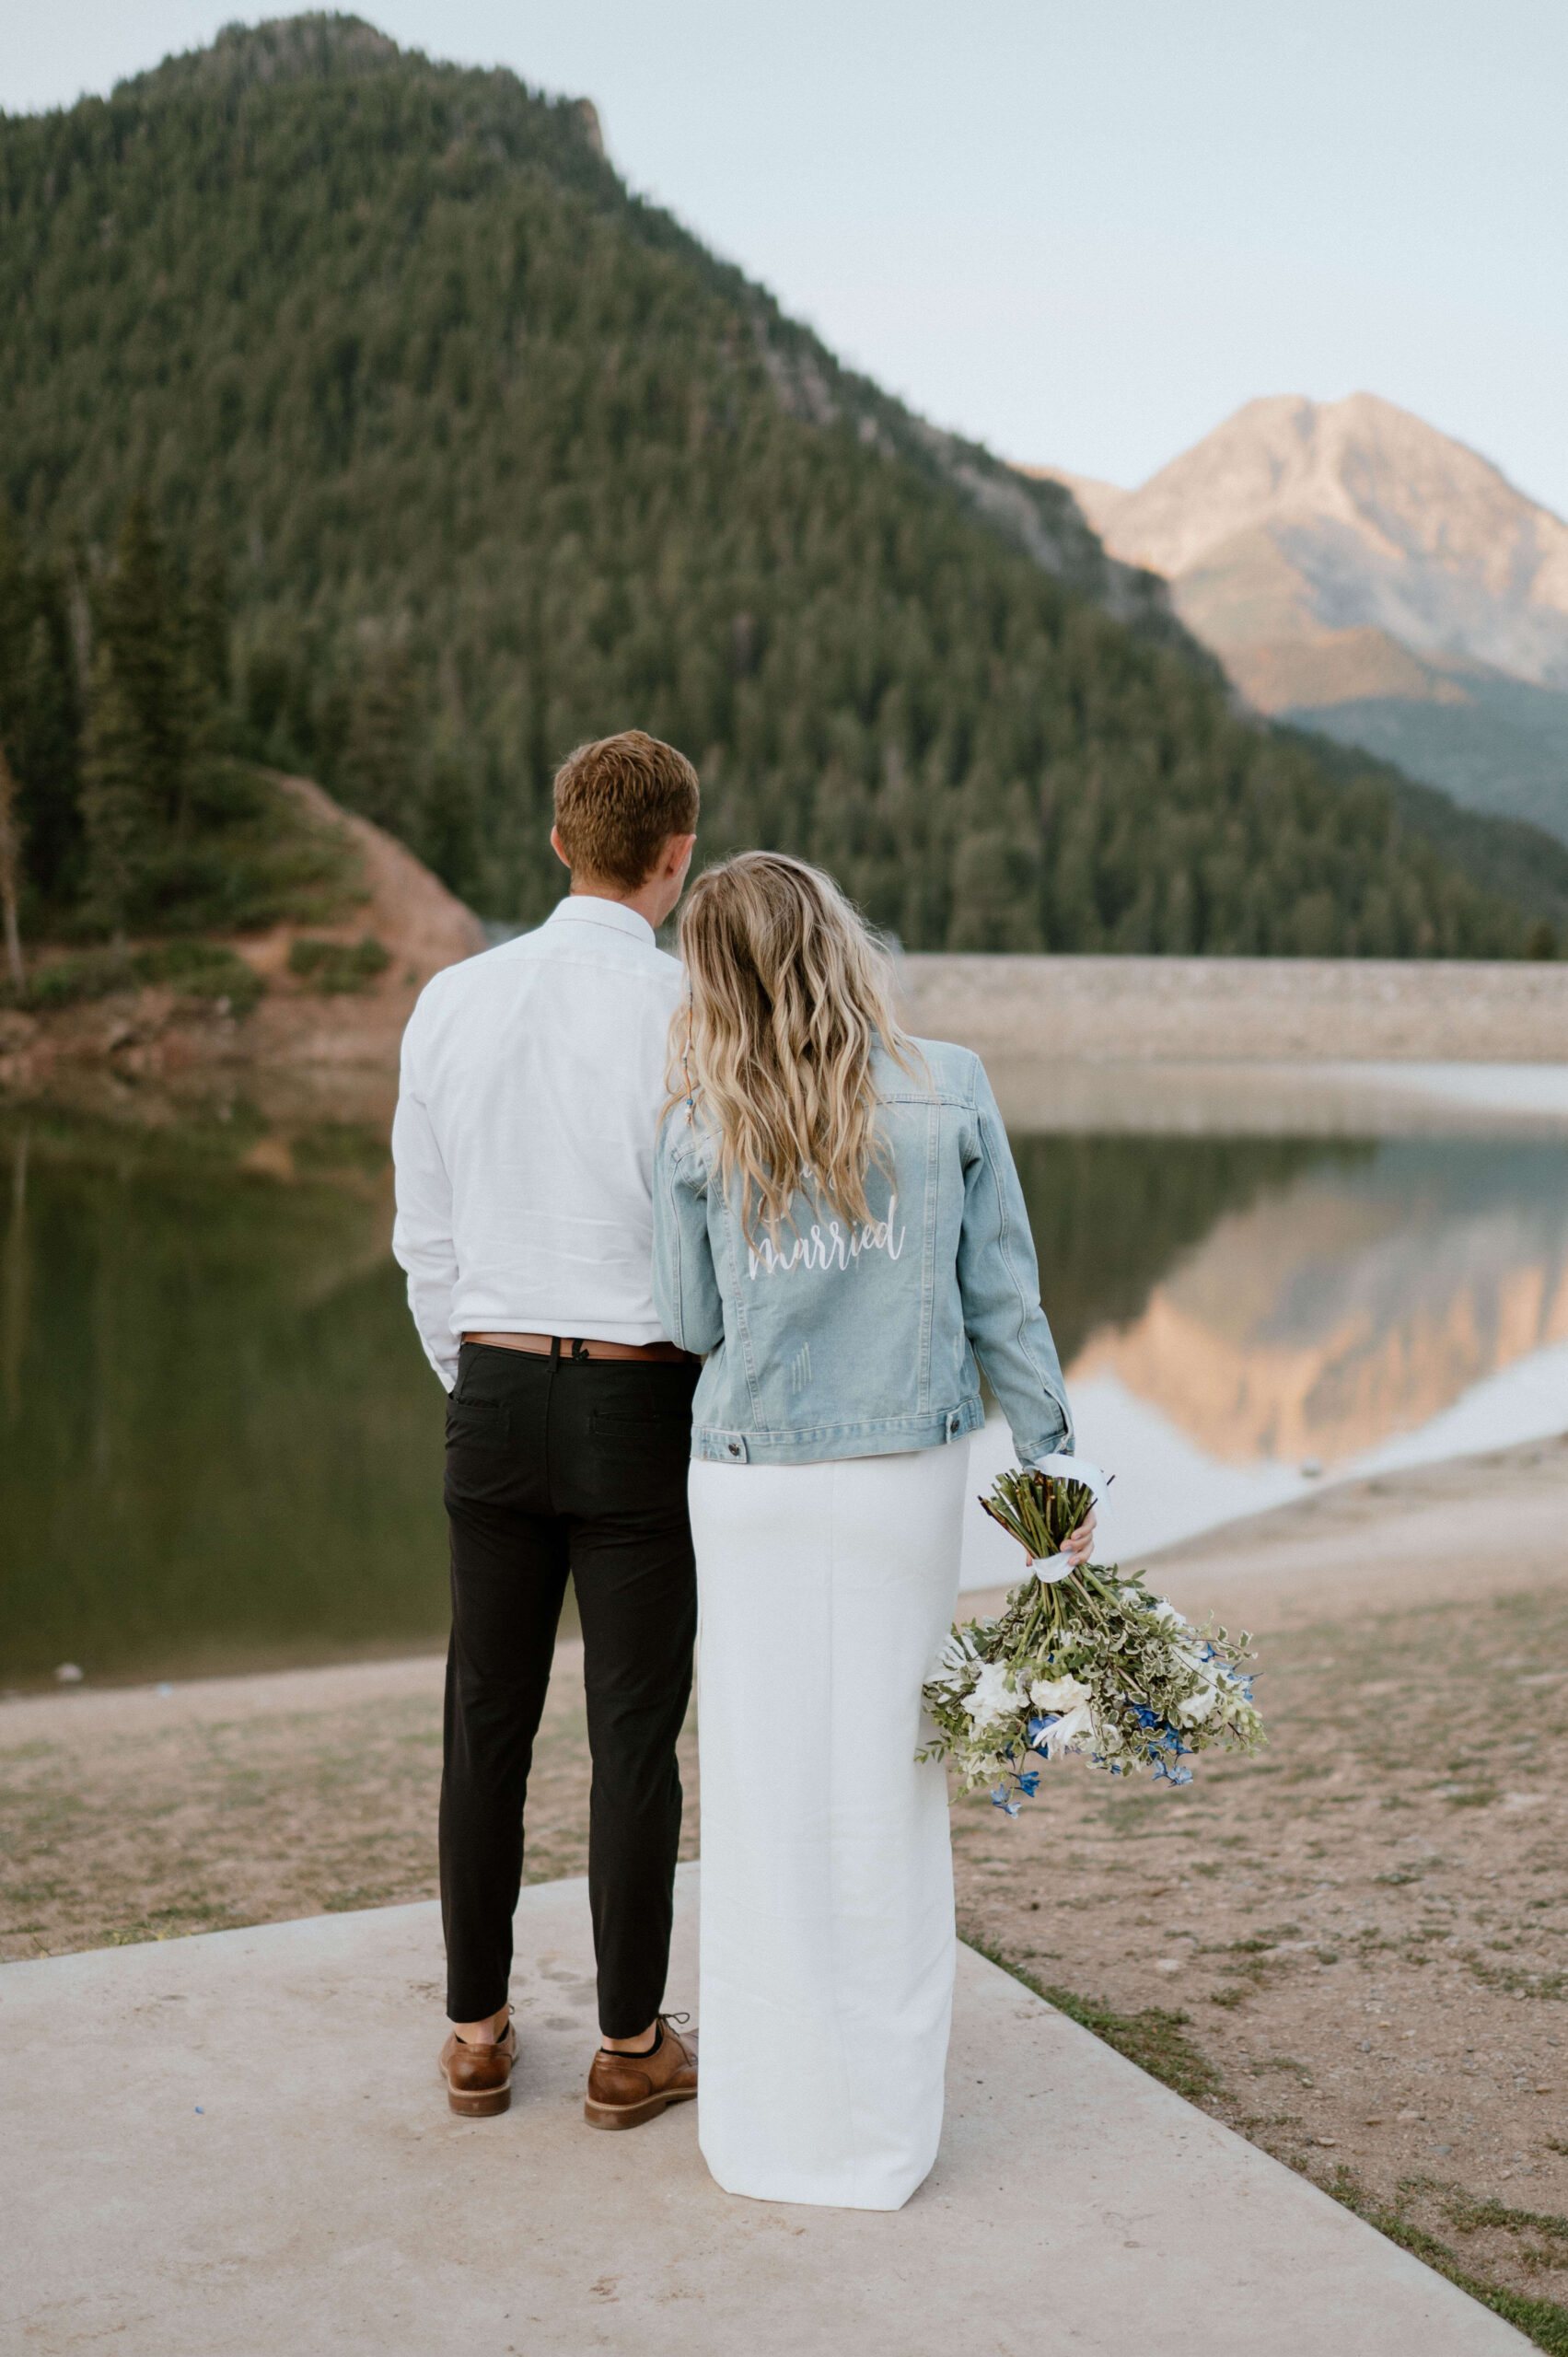 A couple faces a beautiful lake and mountain range in Utah after saying vows